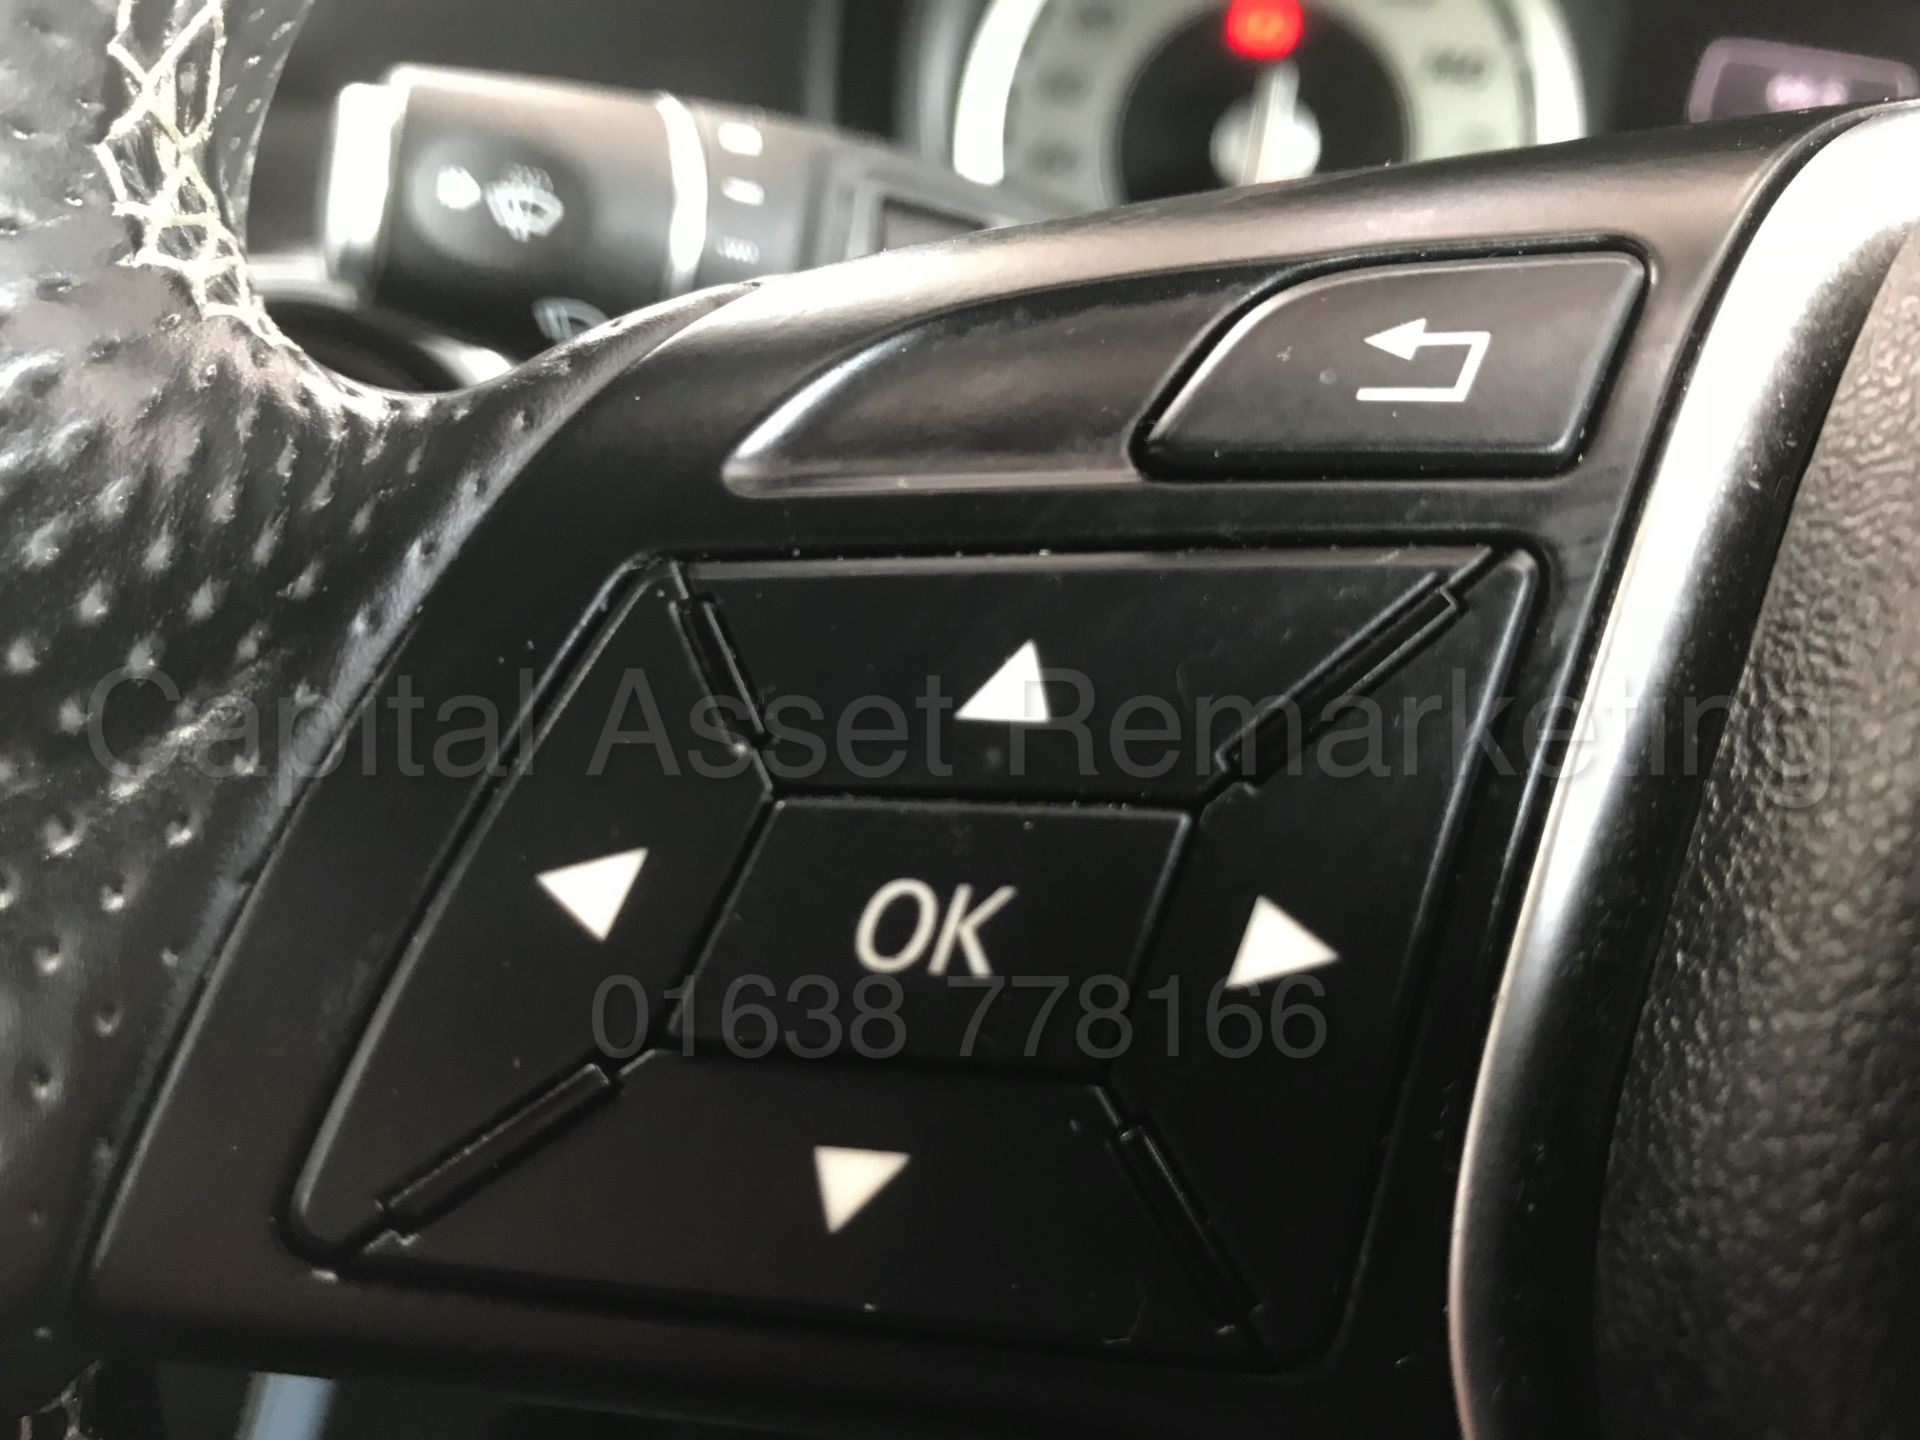 (On Sale) MERCEDES-BENZ A180 CDI 'SPORT EDITION' (2015) 'LEATHER - SAT NAV - STOP/START' (1 OWNER) - Image 34 of 36